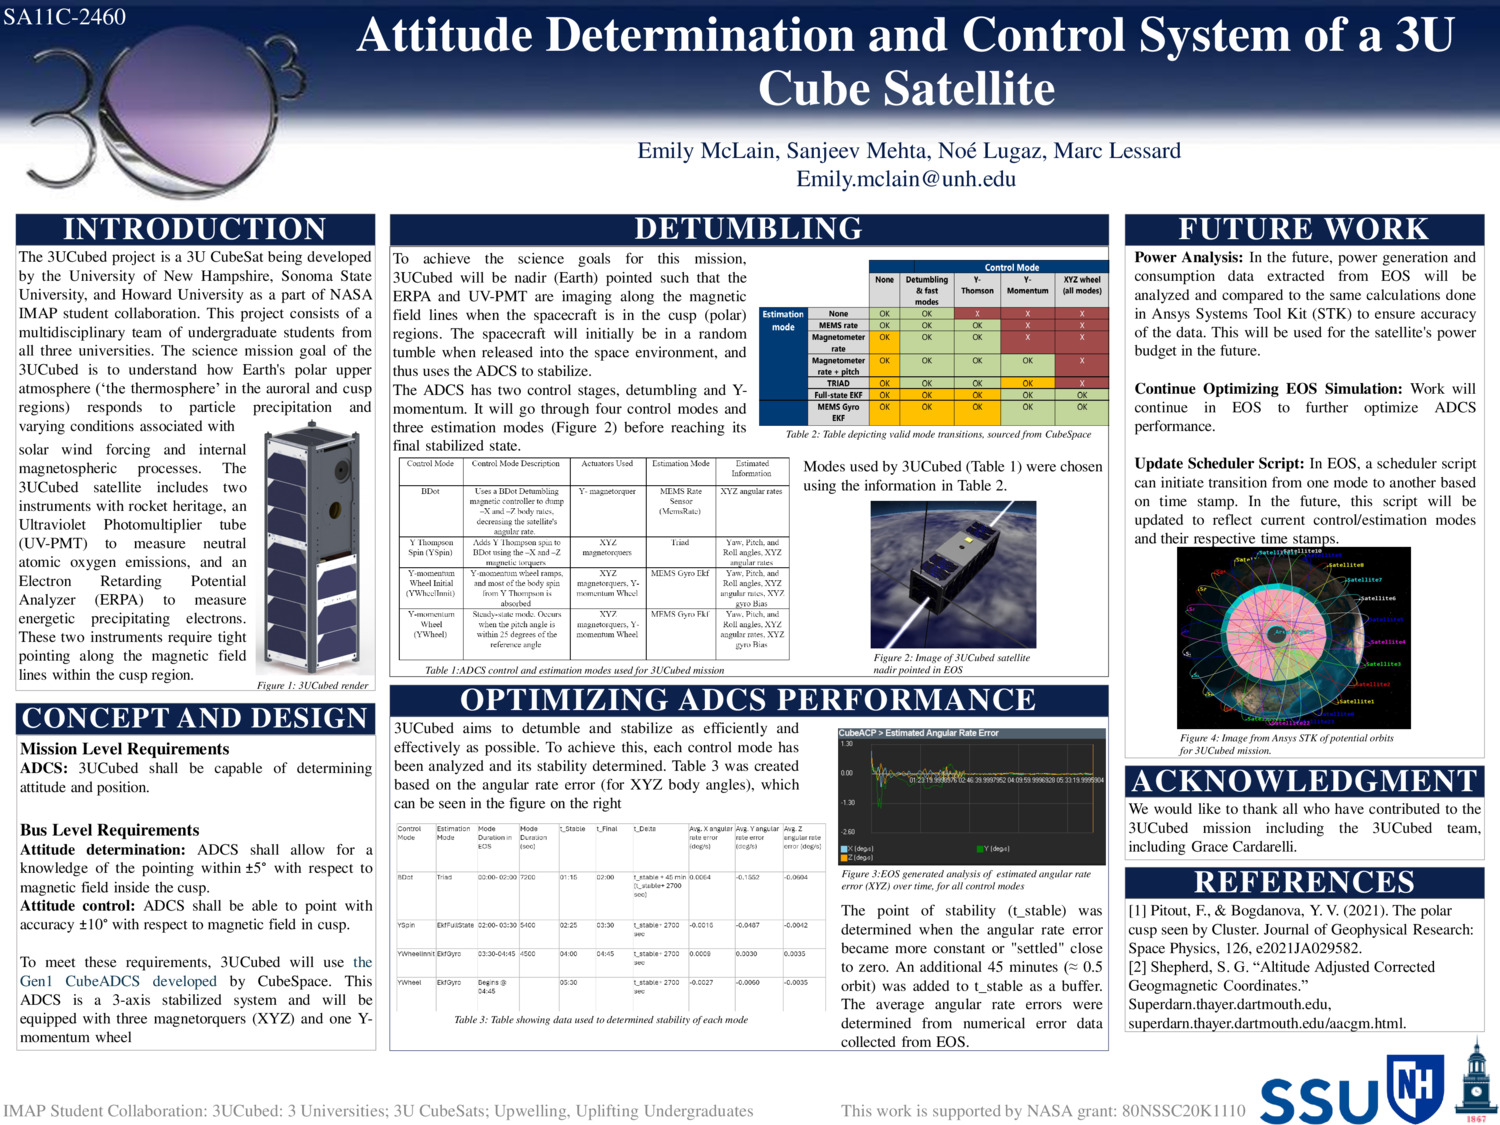 Attitude Determination And Control System Of A 3u Cube Satellite by emm1153